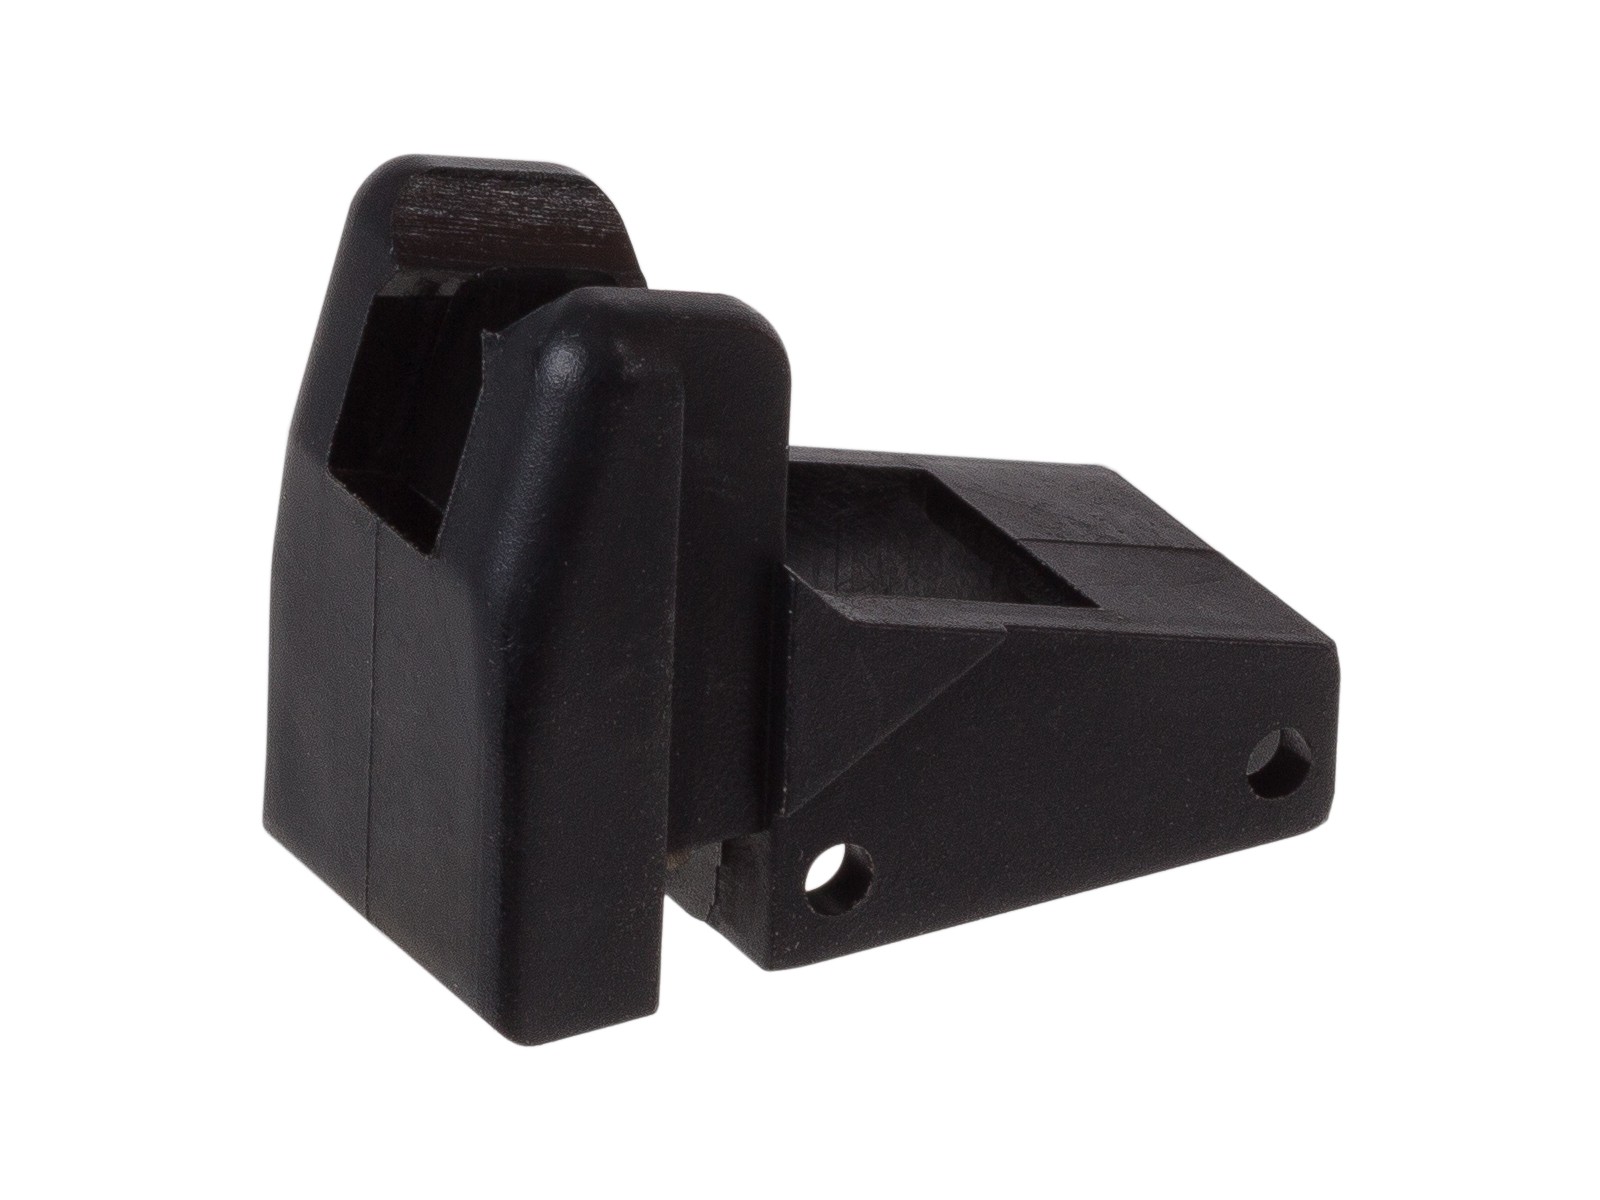 Feed Lips for Springfield Armory XDM 6mm Airsoft pistol